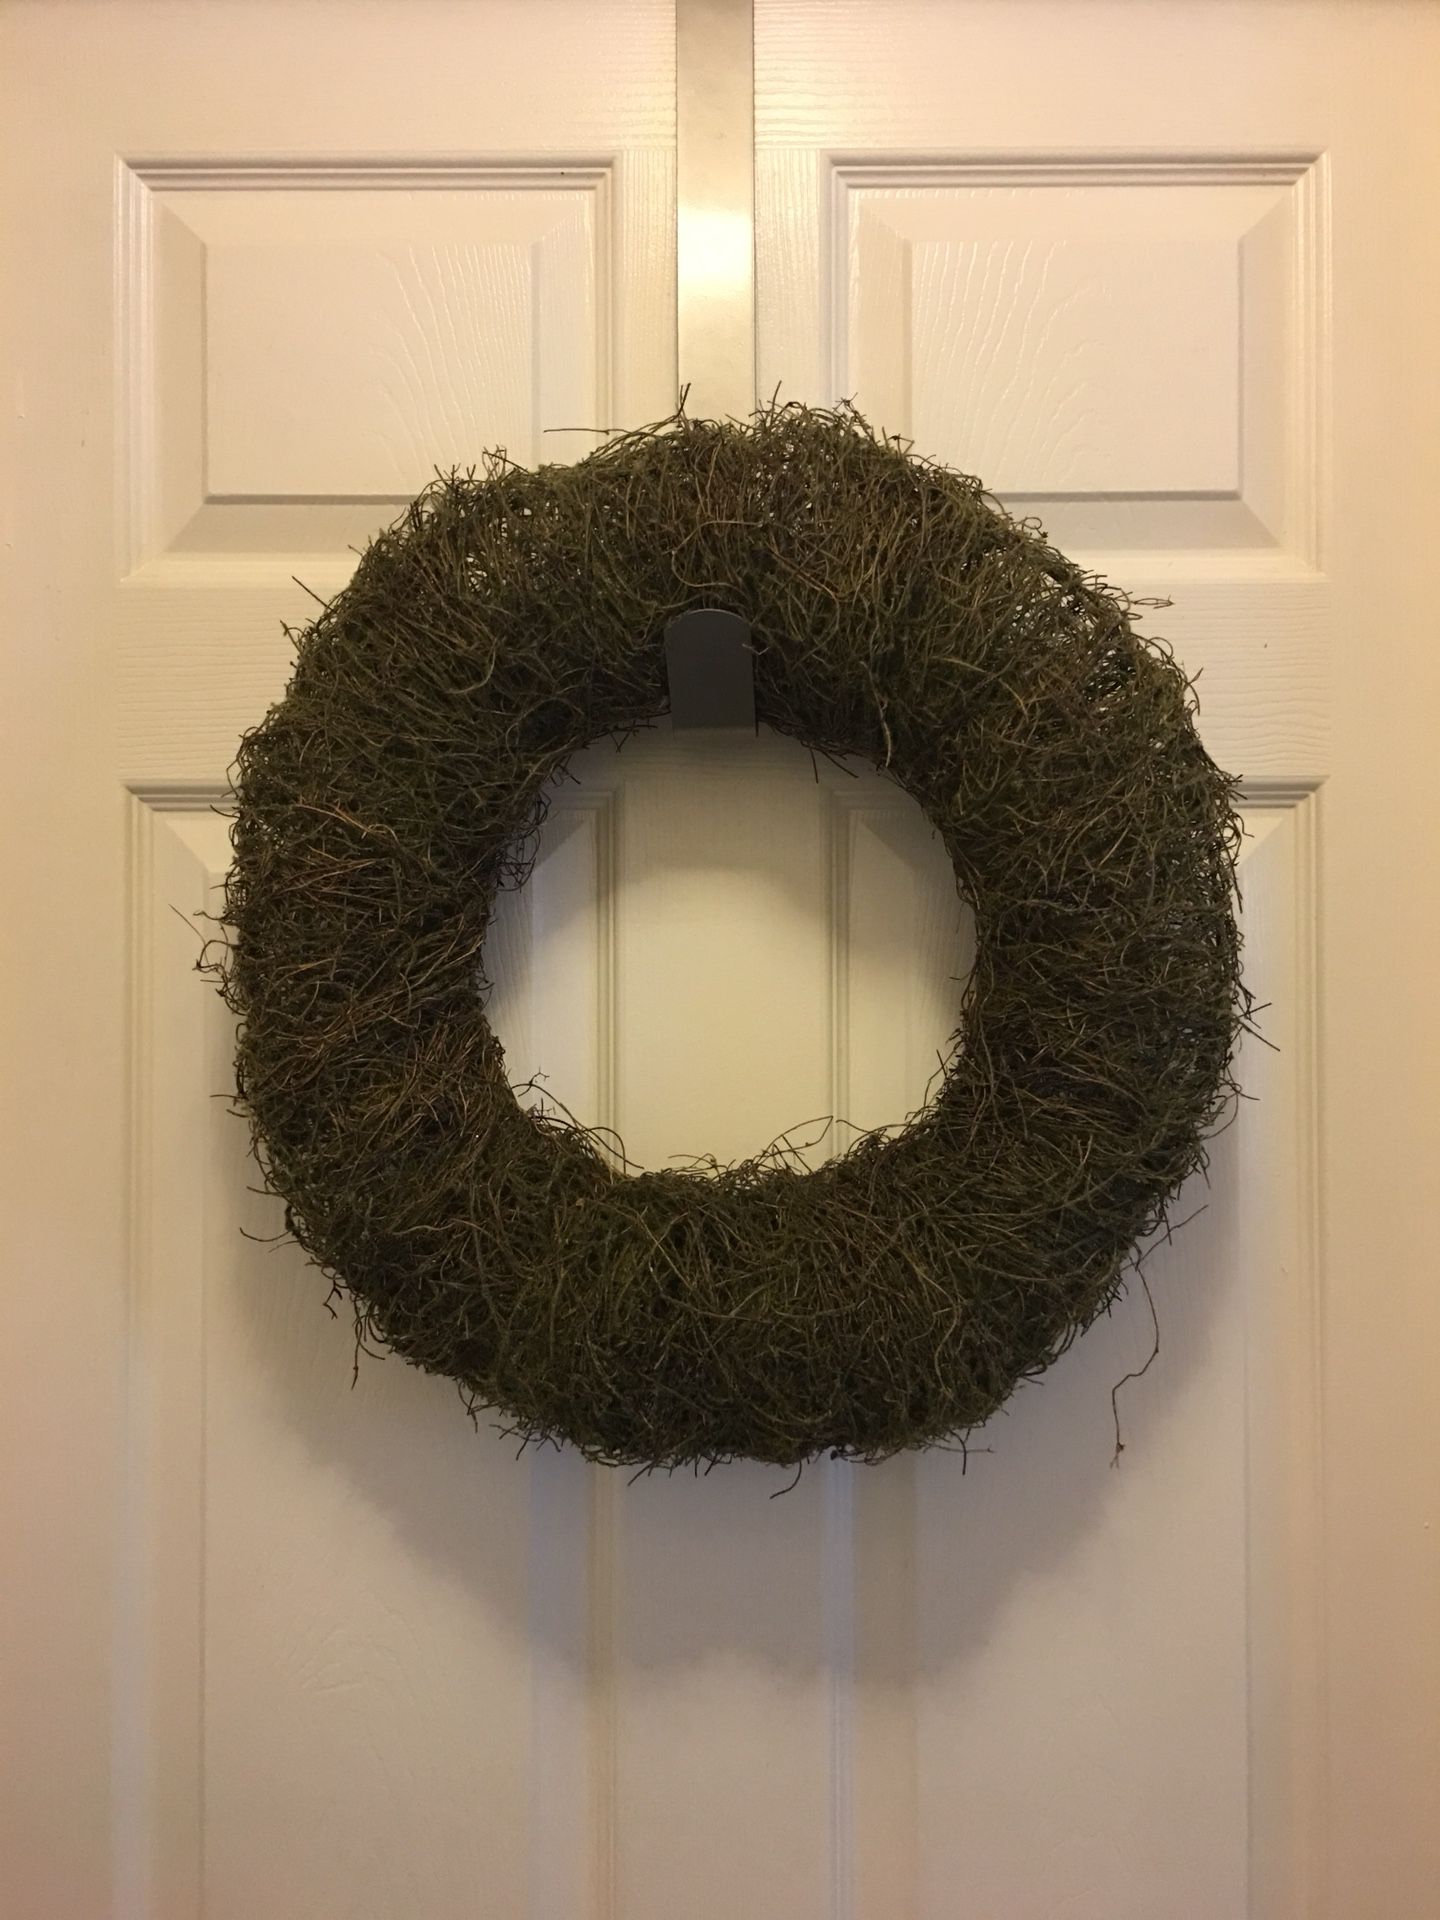 Moss covered wreath